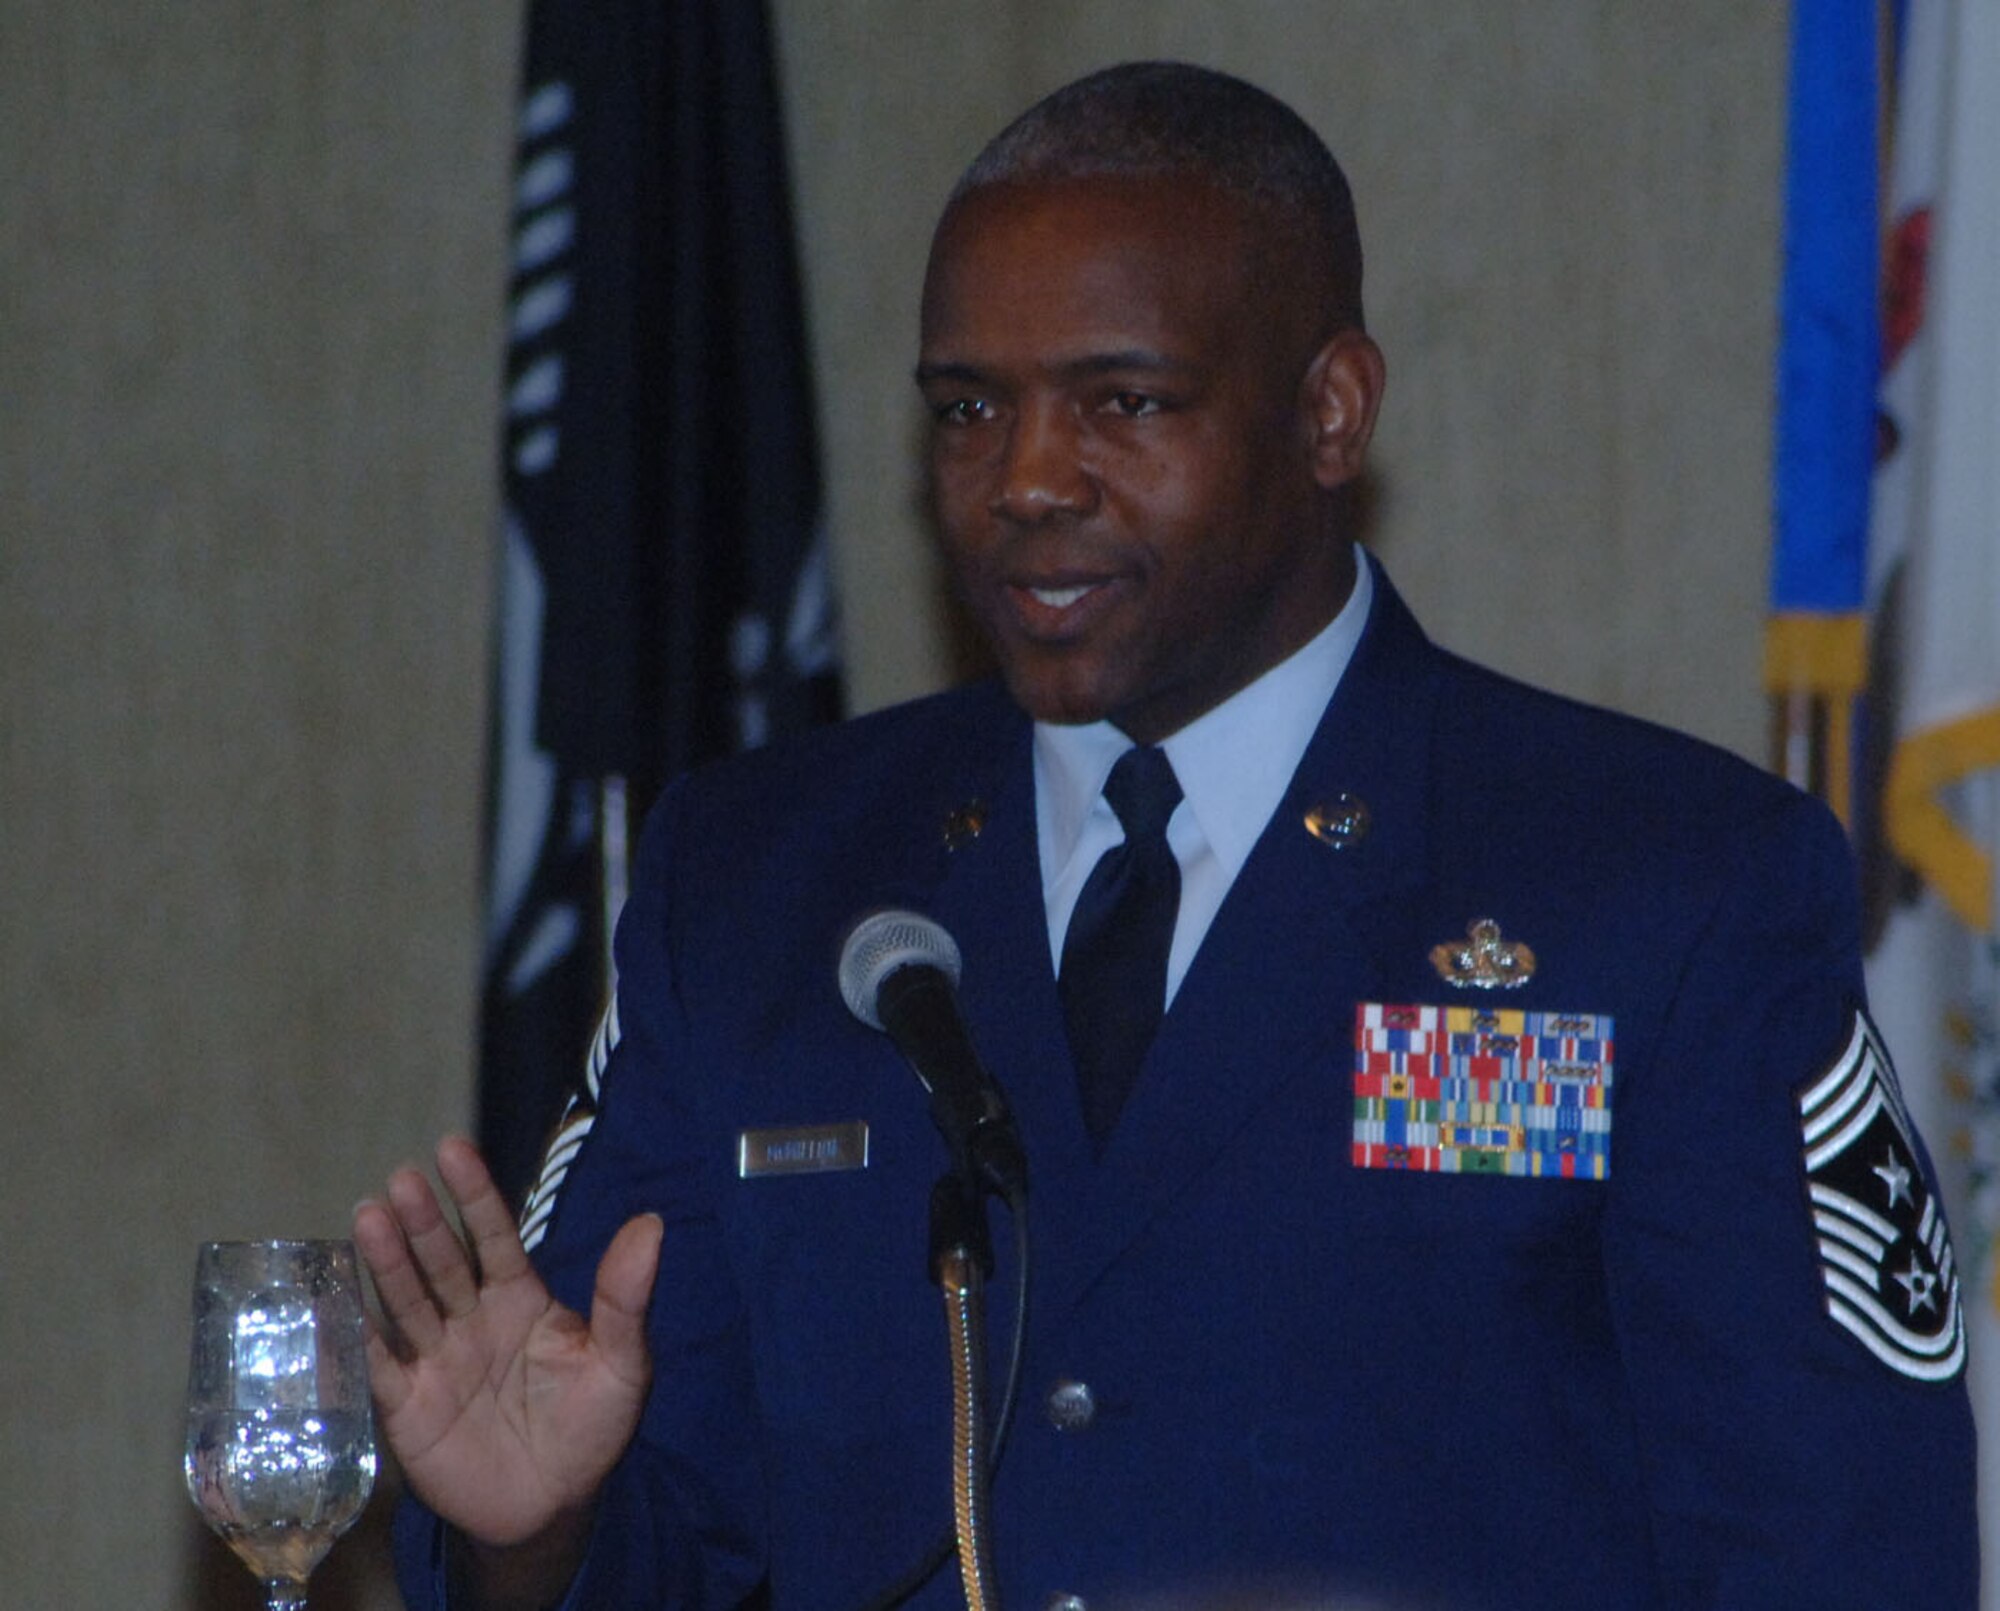 Chief Master Sgt. Brye McMillon, 18th Air Force Command Chief Master Sergeant at Scott AFB, Ill., was the keynote speaker at the Black History Luncheon Wednesday at the Columbus Club.  (U.S. Air Force photo by Airman 1st Class Danielle Hill)